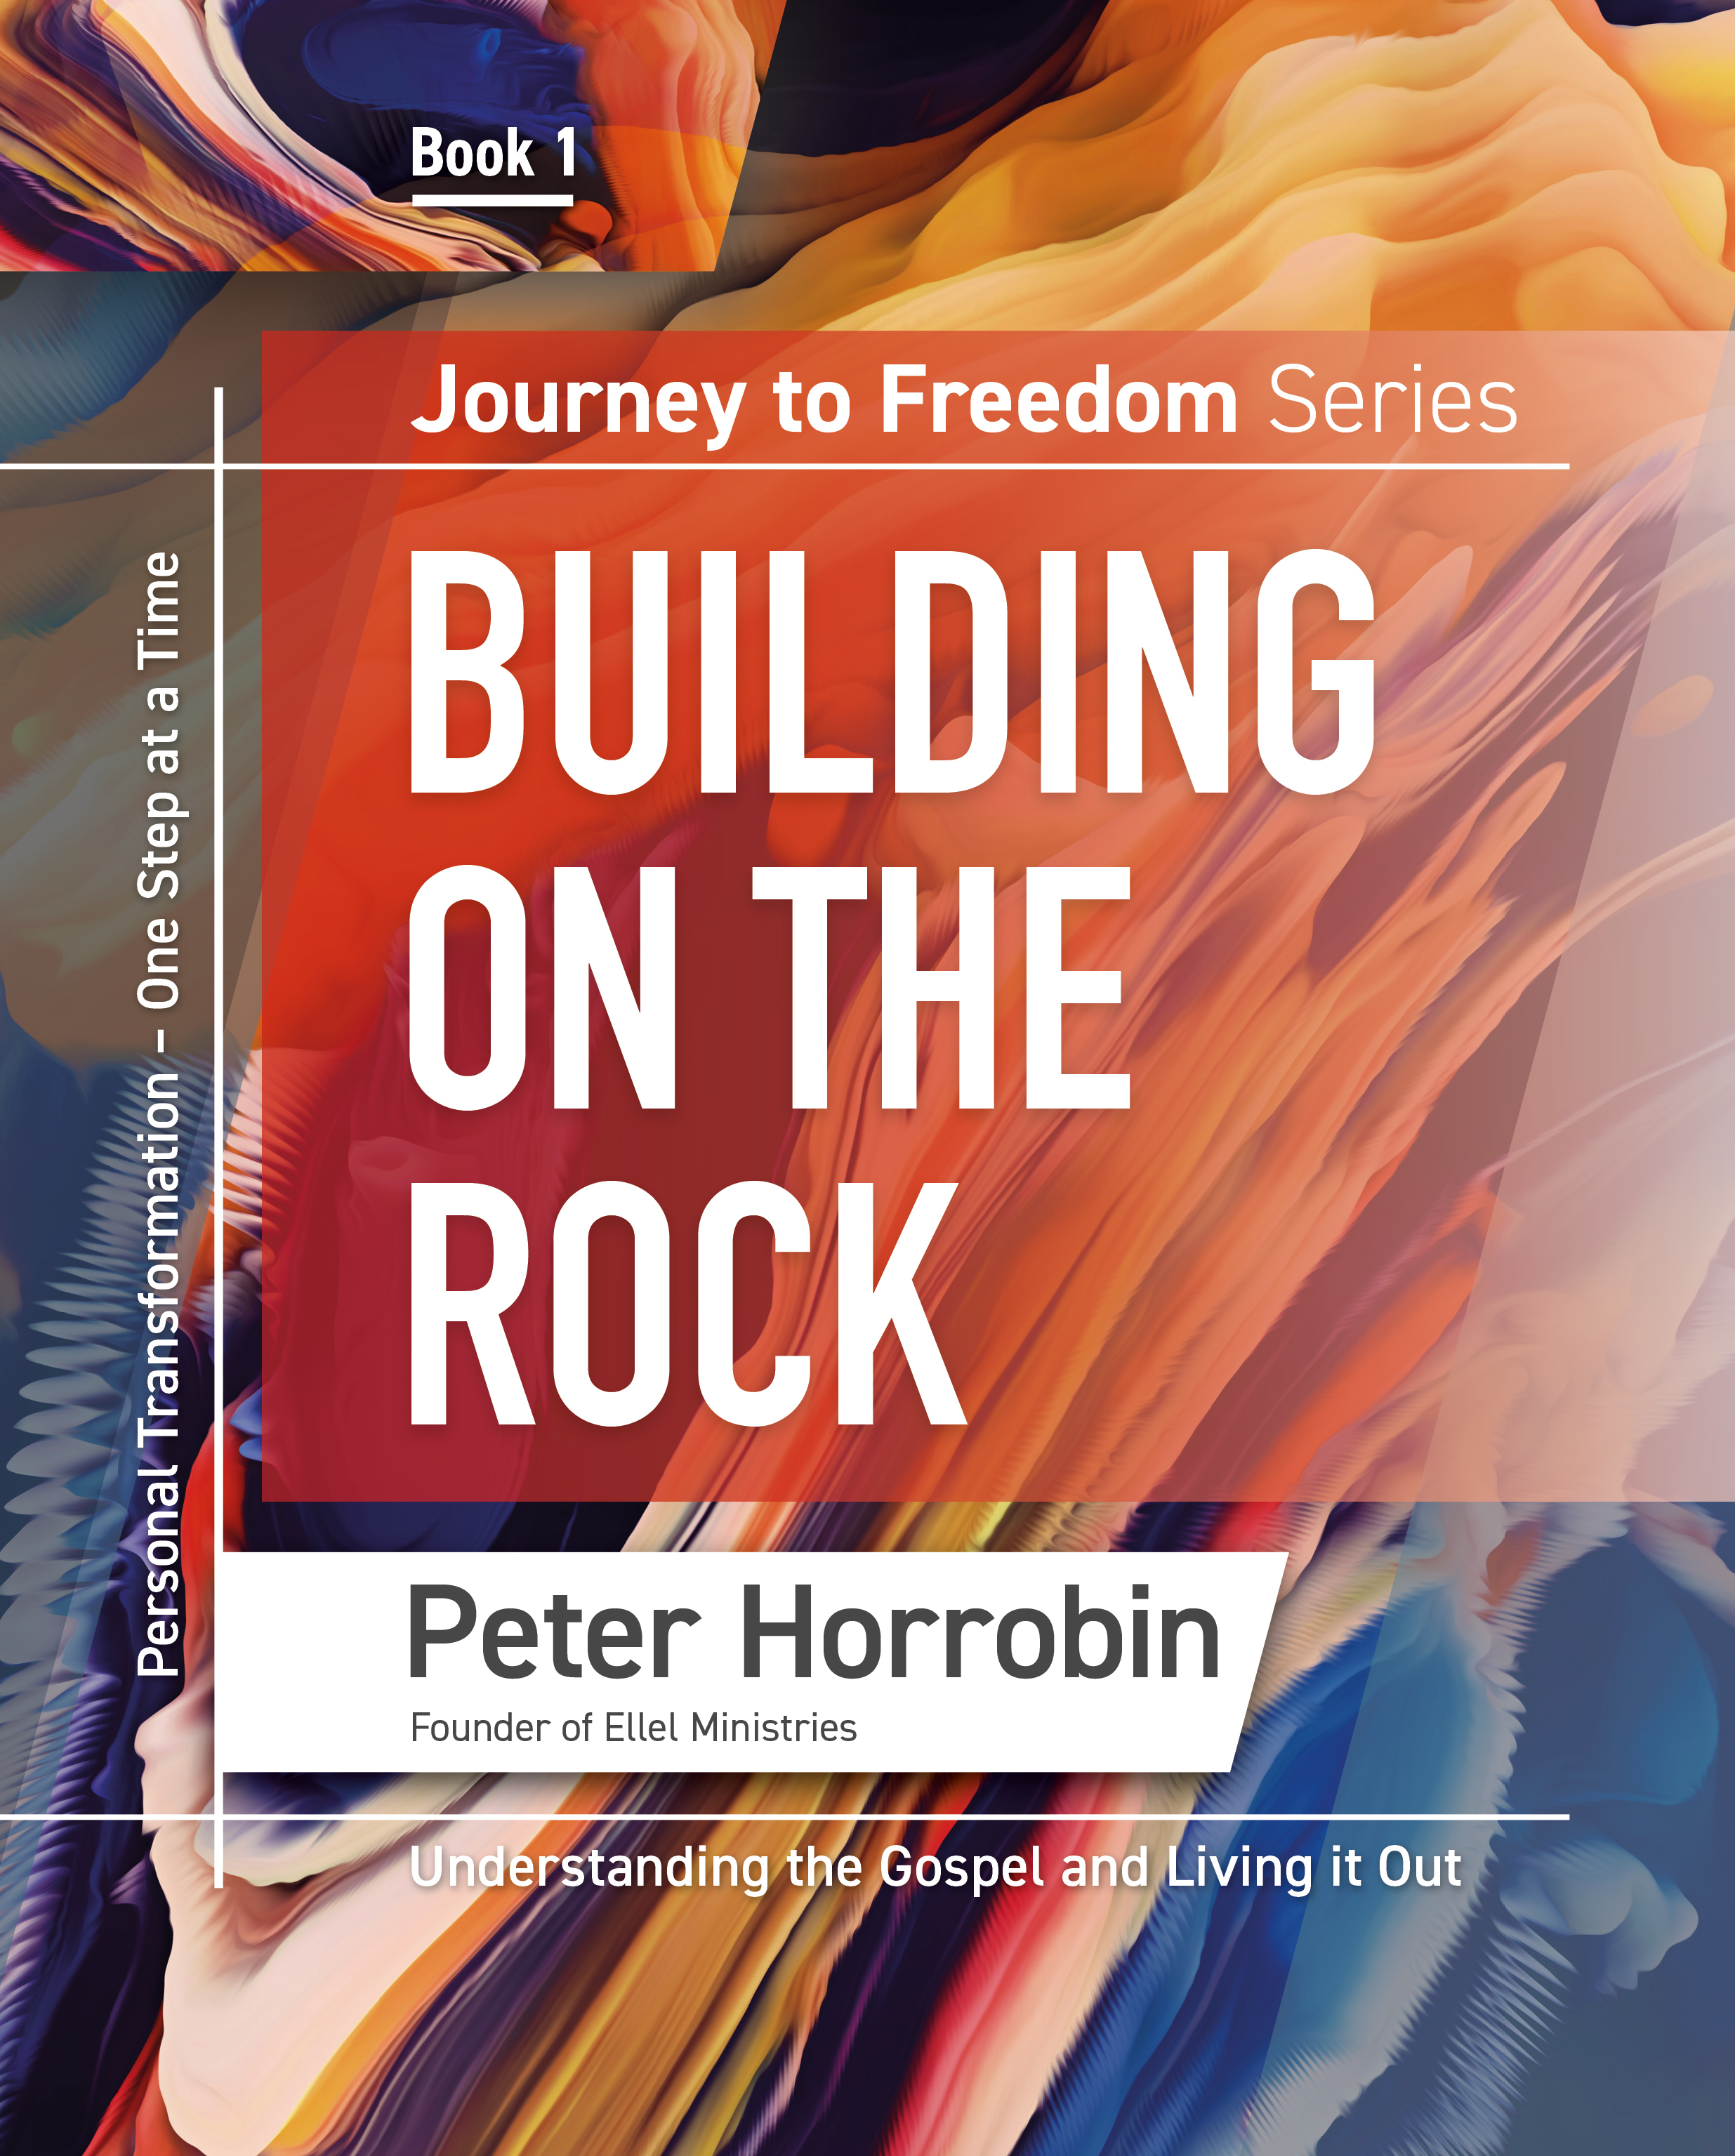 Journey to Freedom Book 1 - Building on the Rock. Peter Horrobin